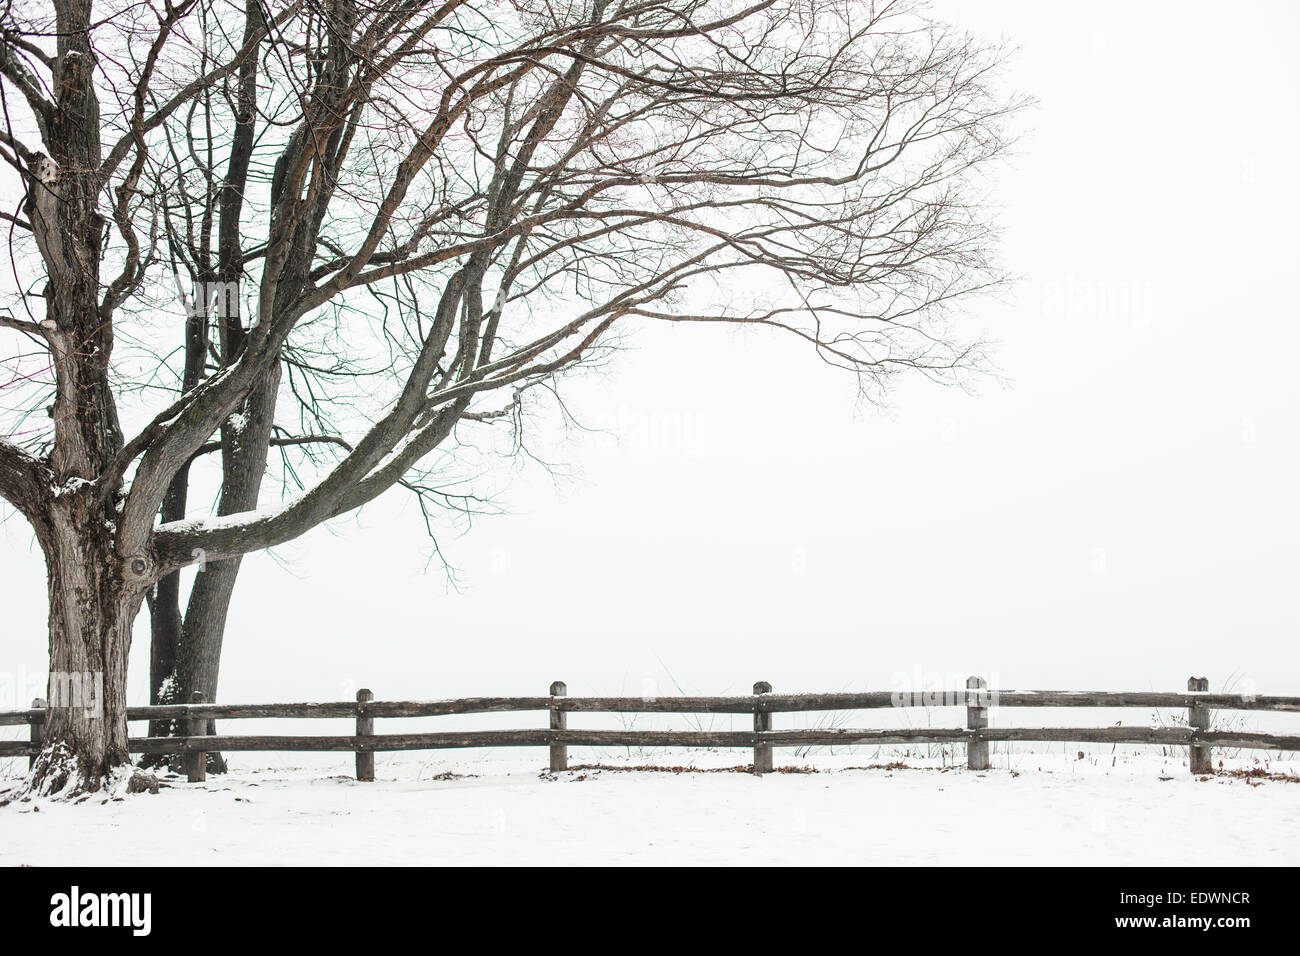 a snowy landscape scene with a wooden fence and two large trees Stock Photo